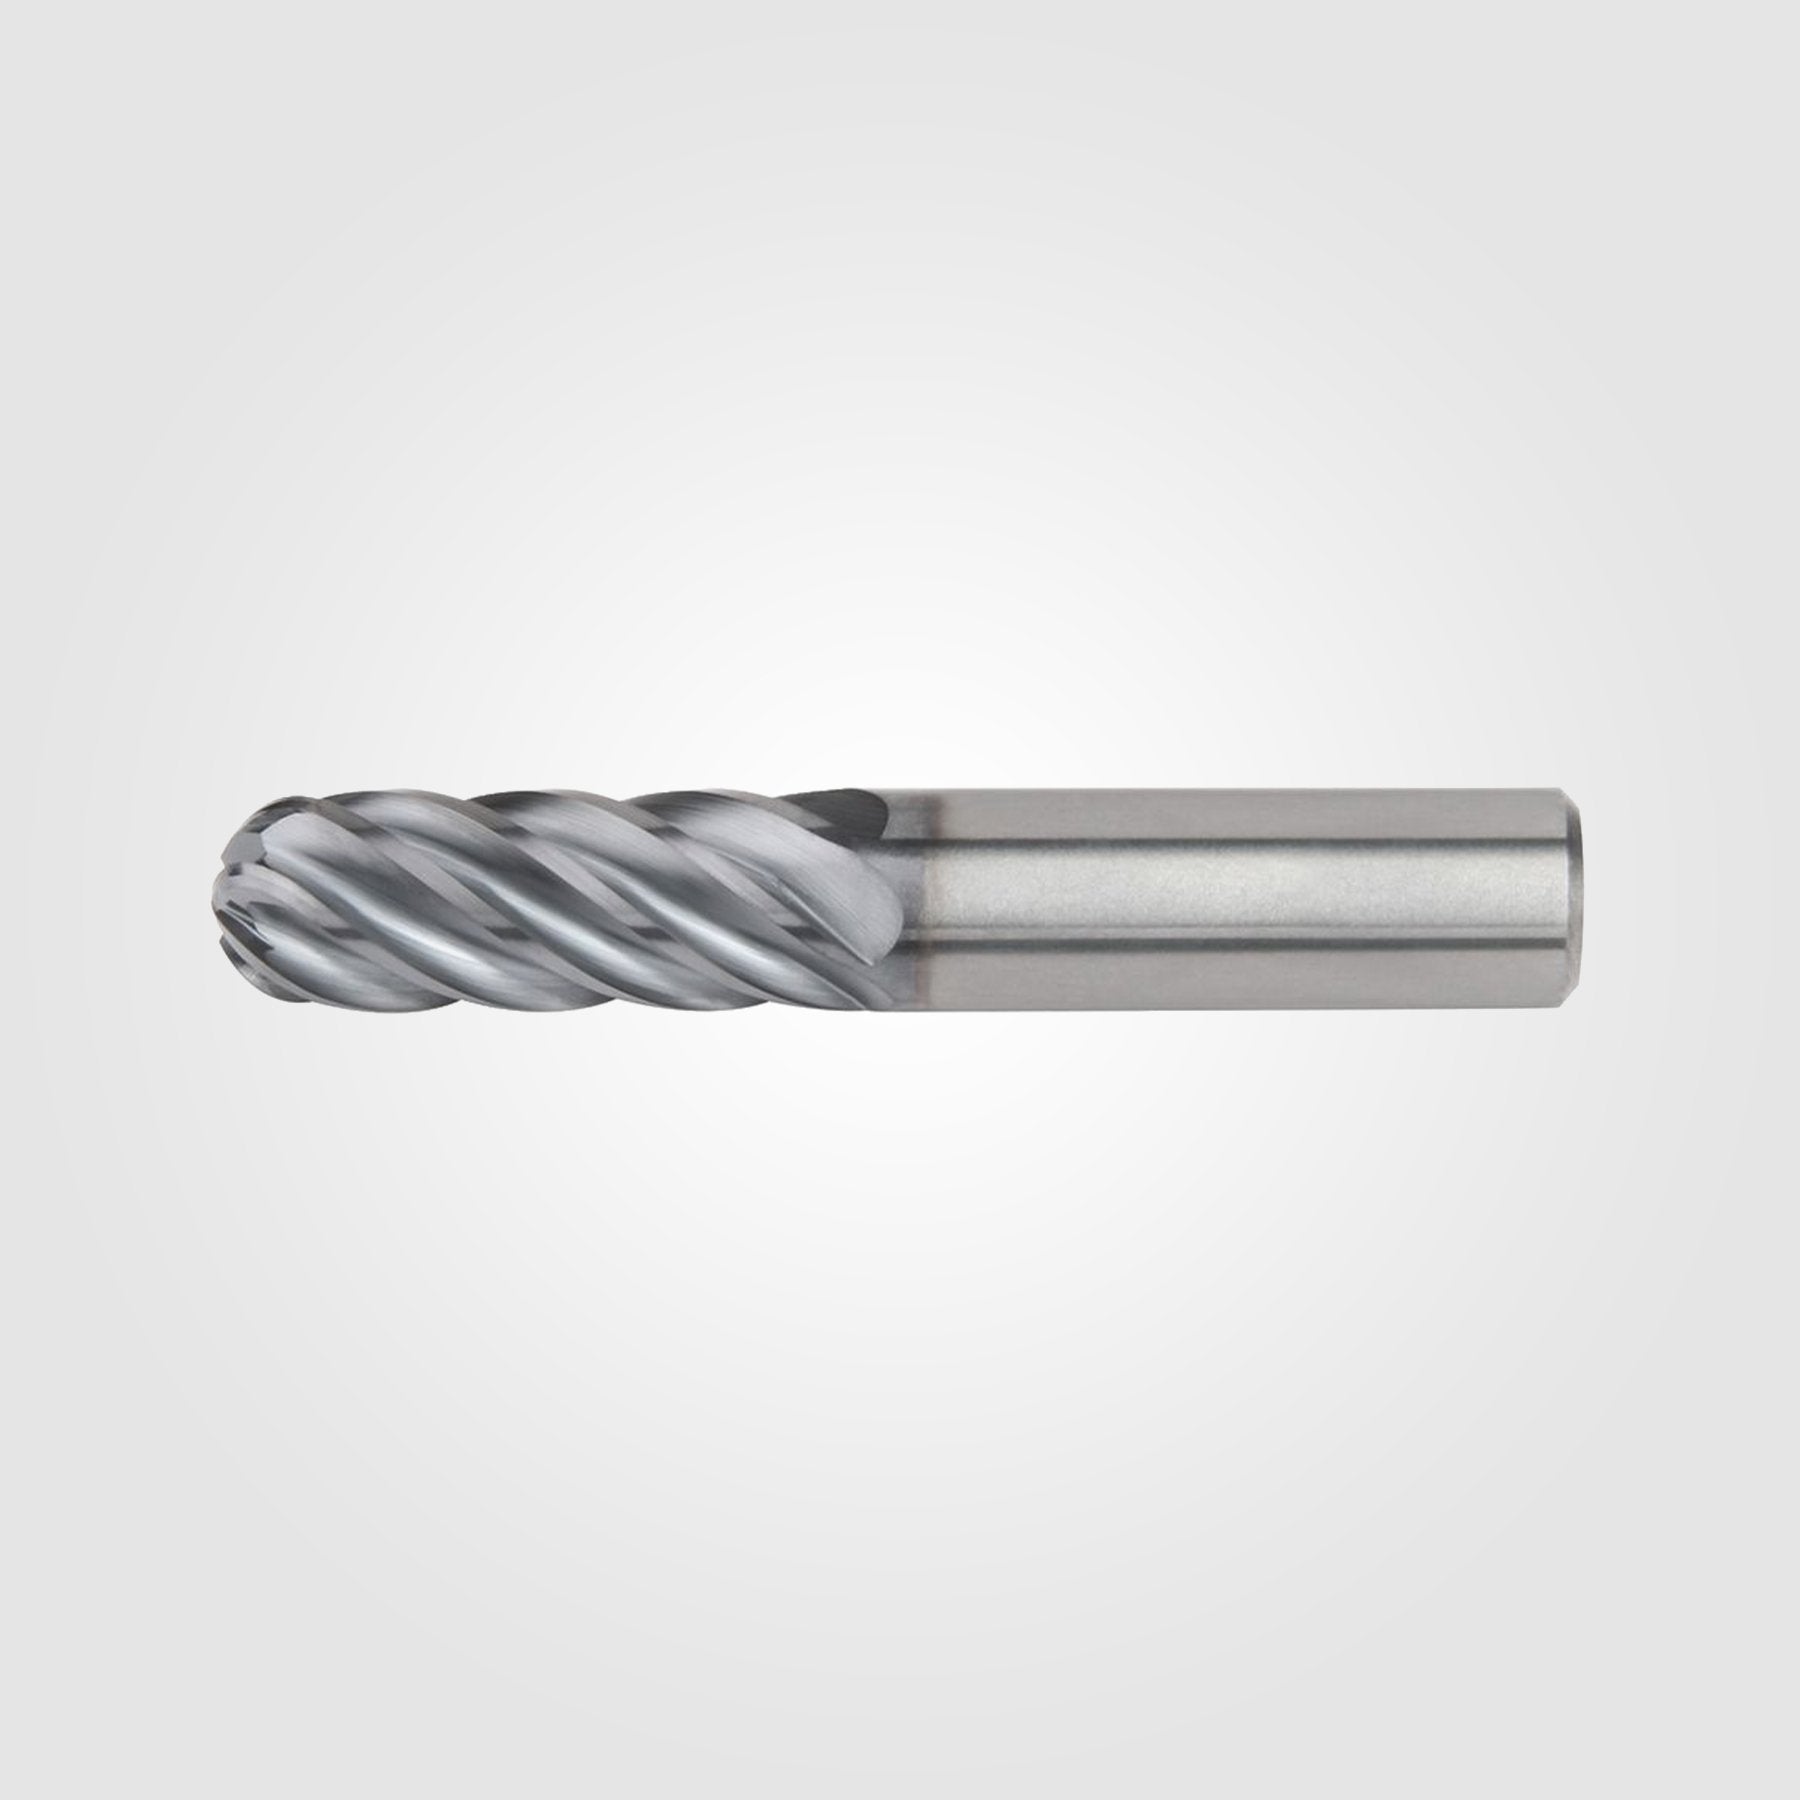 HARVI III (BALL NOSE AEROSPACE EXPANSION) | 1/2" x 1/2" x 1" x 3" | 6 FLUTE SOLID CARBIDE ENDMILL | 6113085